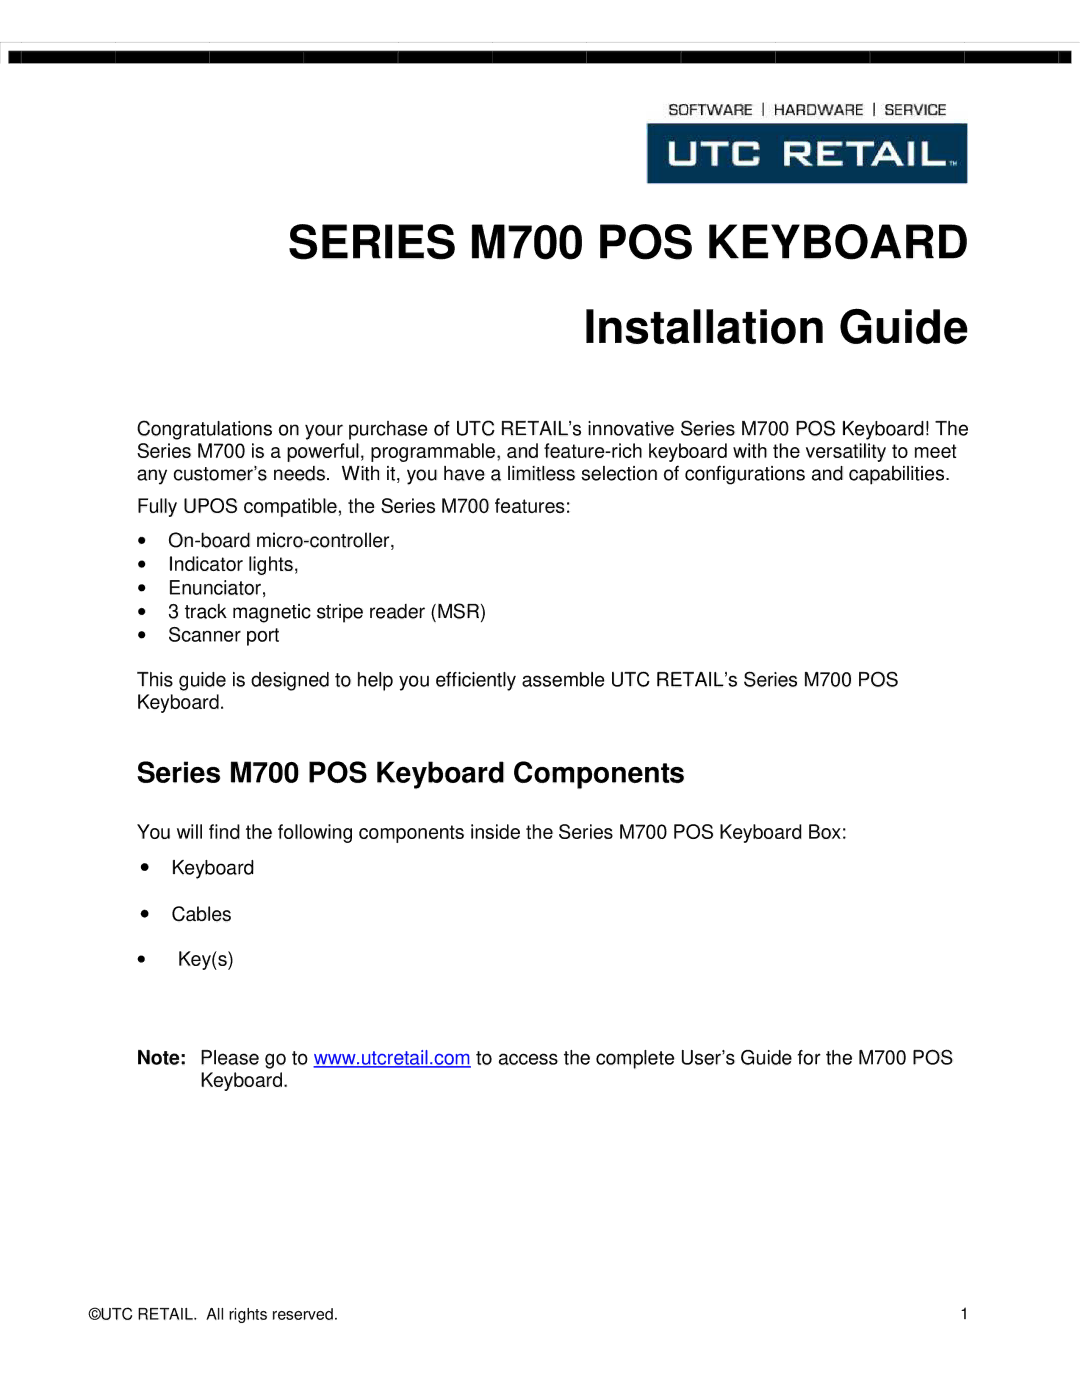 Ultimate Technology manual Installation Guide, Series M700 POS Keyboard Components 